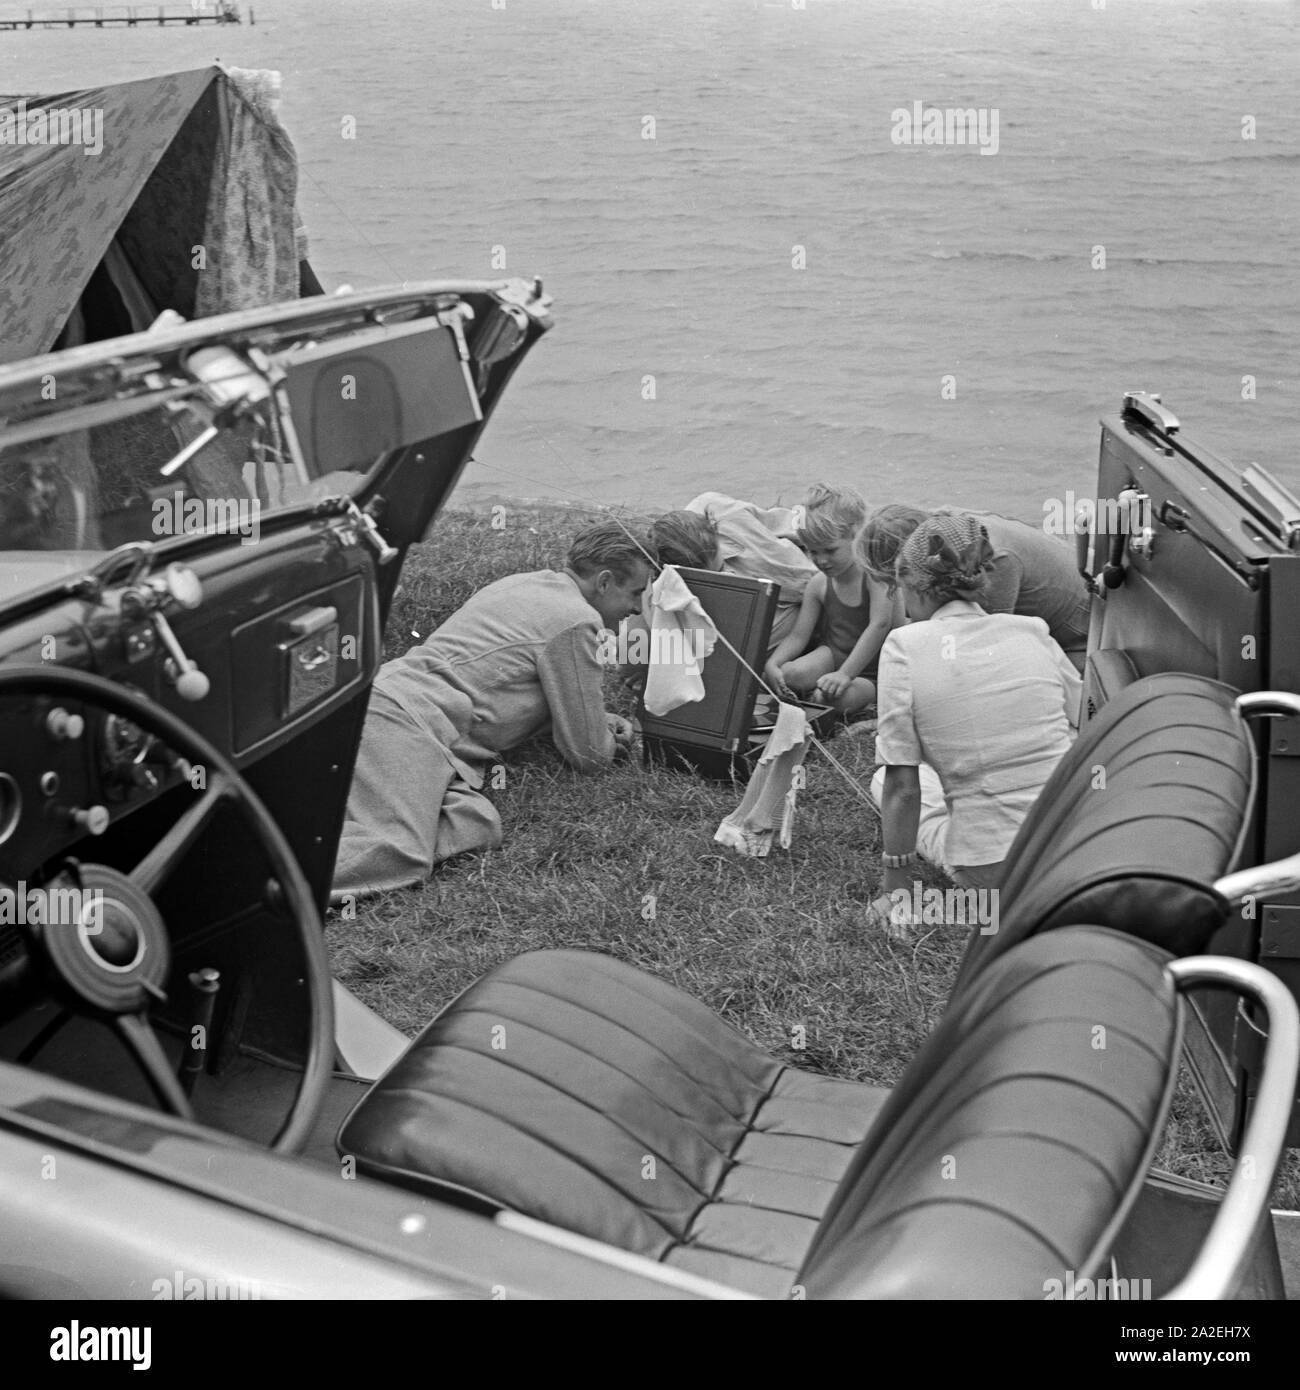 Campingausflug mit einem Ford V8 Cabrio ans Ufer eines Sees, wo die Familie um ein Electrole Koffer 106 Grammophon sitzt, Deutschland 1930er Jahre. Camping trip with a Ford V8 convertible to the shore of a lake, where the family is listening to music, played by an Electrola Koffer 106 suitcase gramophone, Germany 1930s. Stock Photo